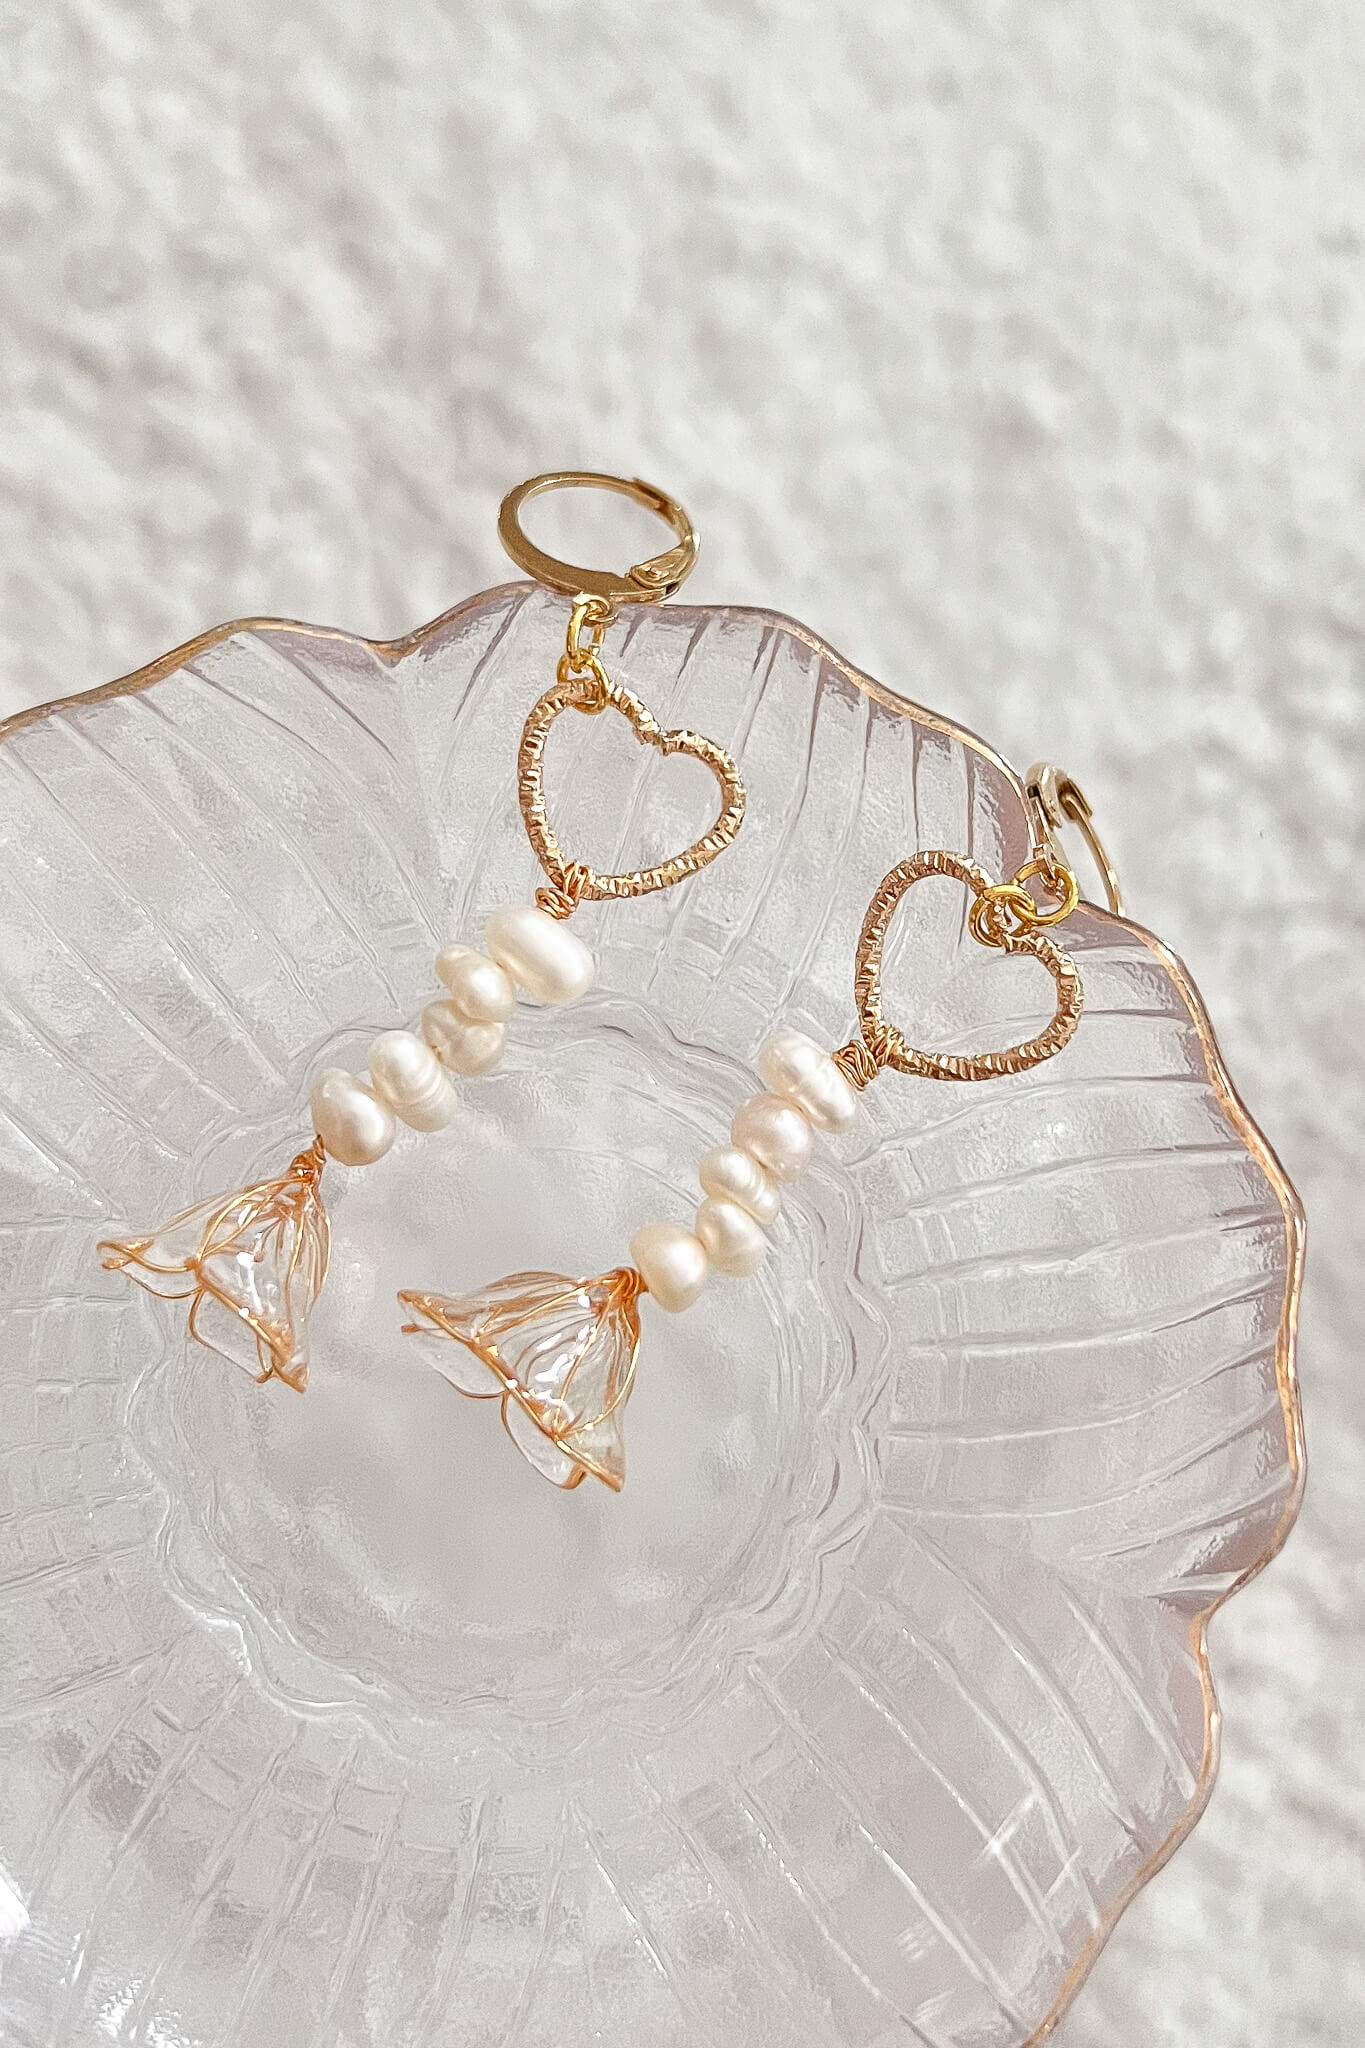 Heart shape Huggie Hoops with wire resin flower earrings and baroque pearls. rose gold | elegant Parisian european chic outfit inspo